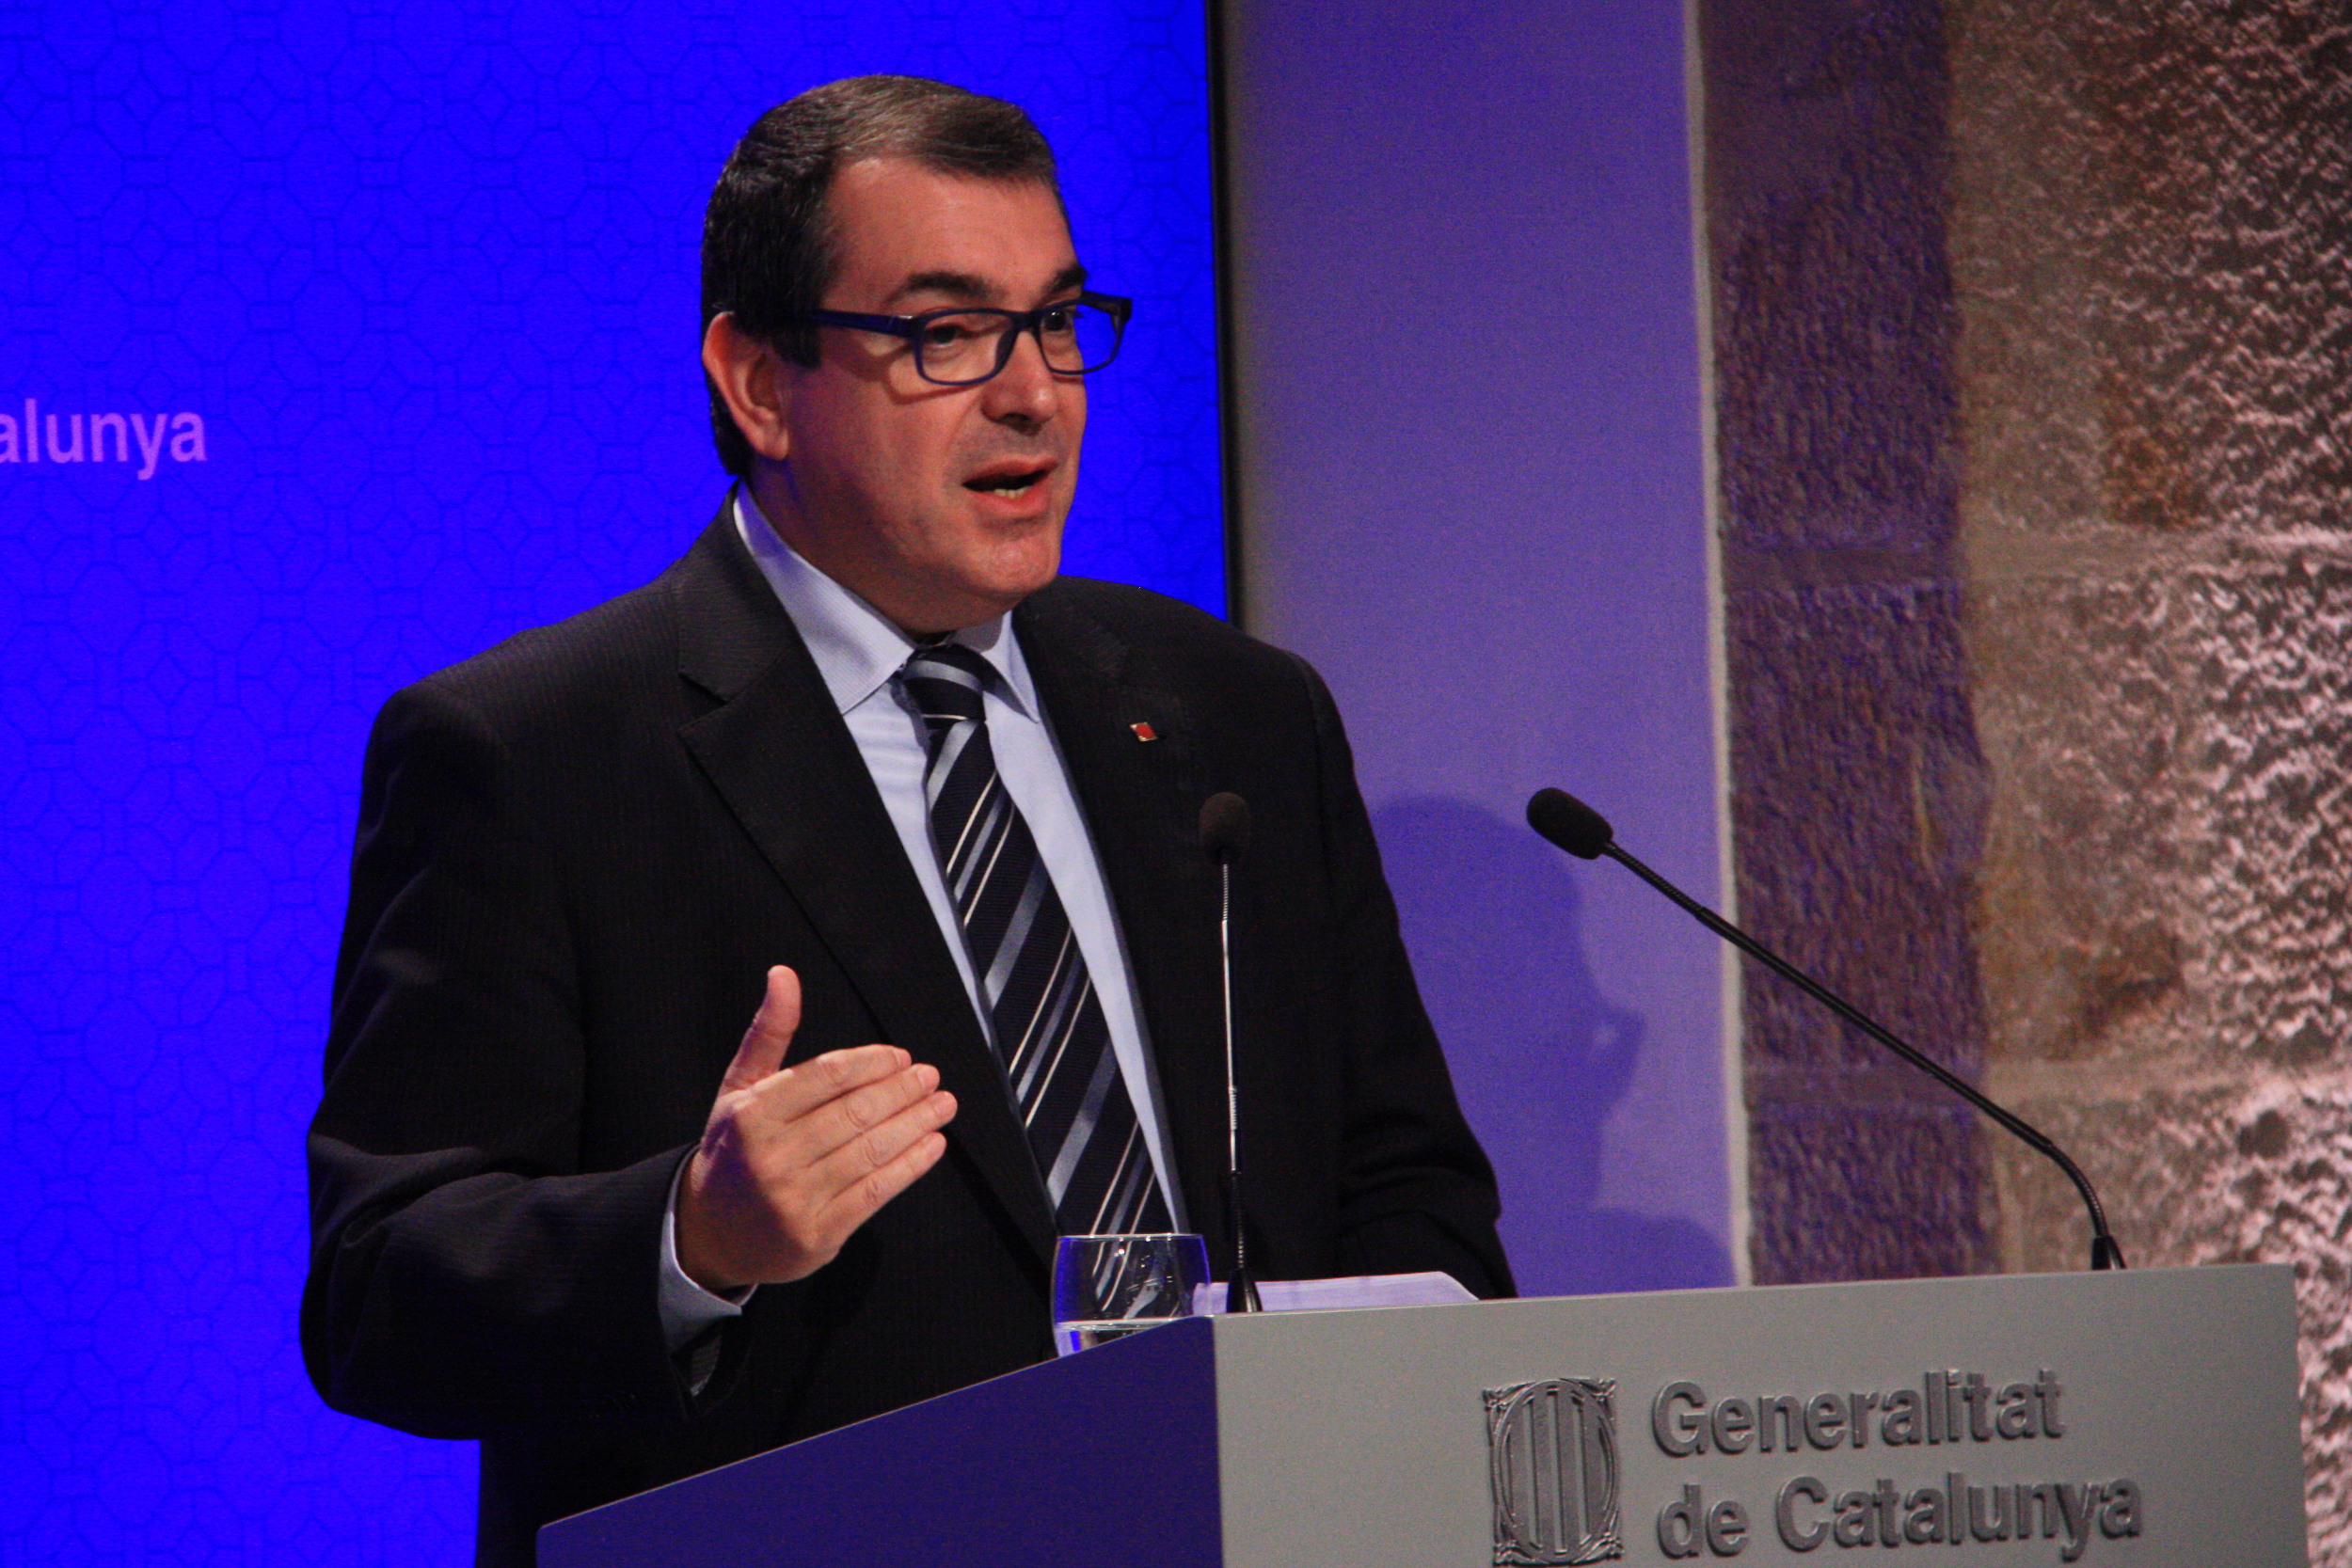 Current Catalan Minister for Home Affairs, Jordi Jané (by ACN)